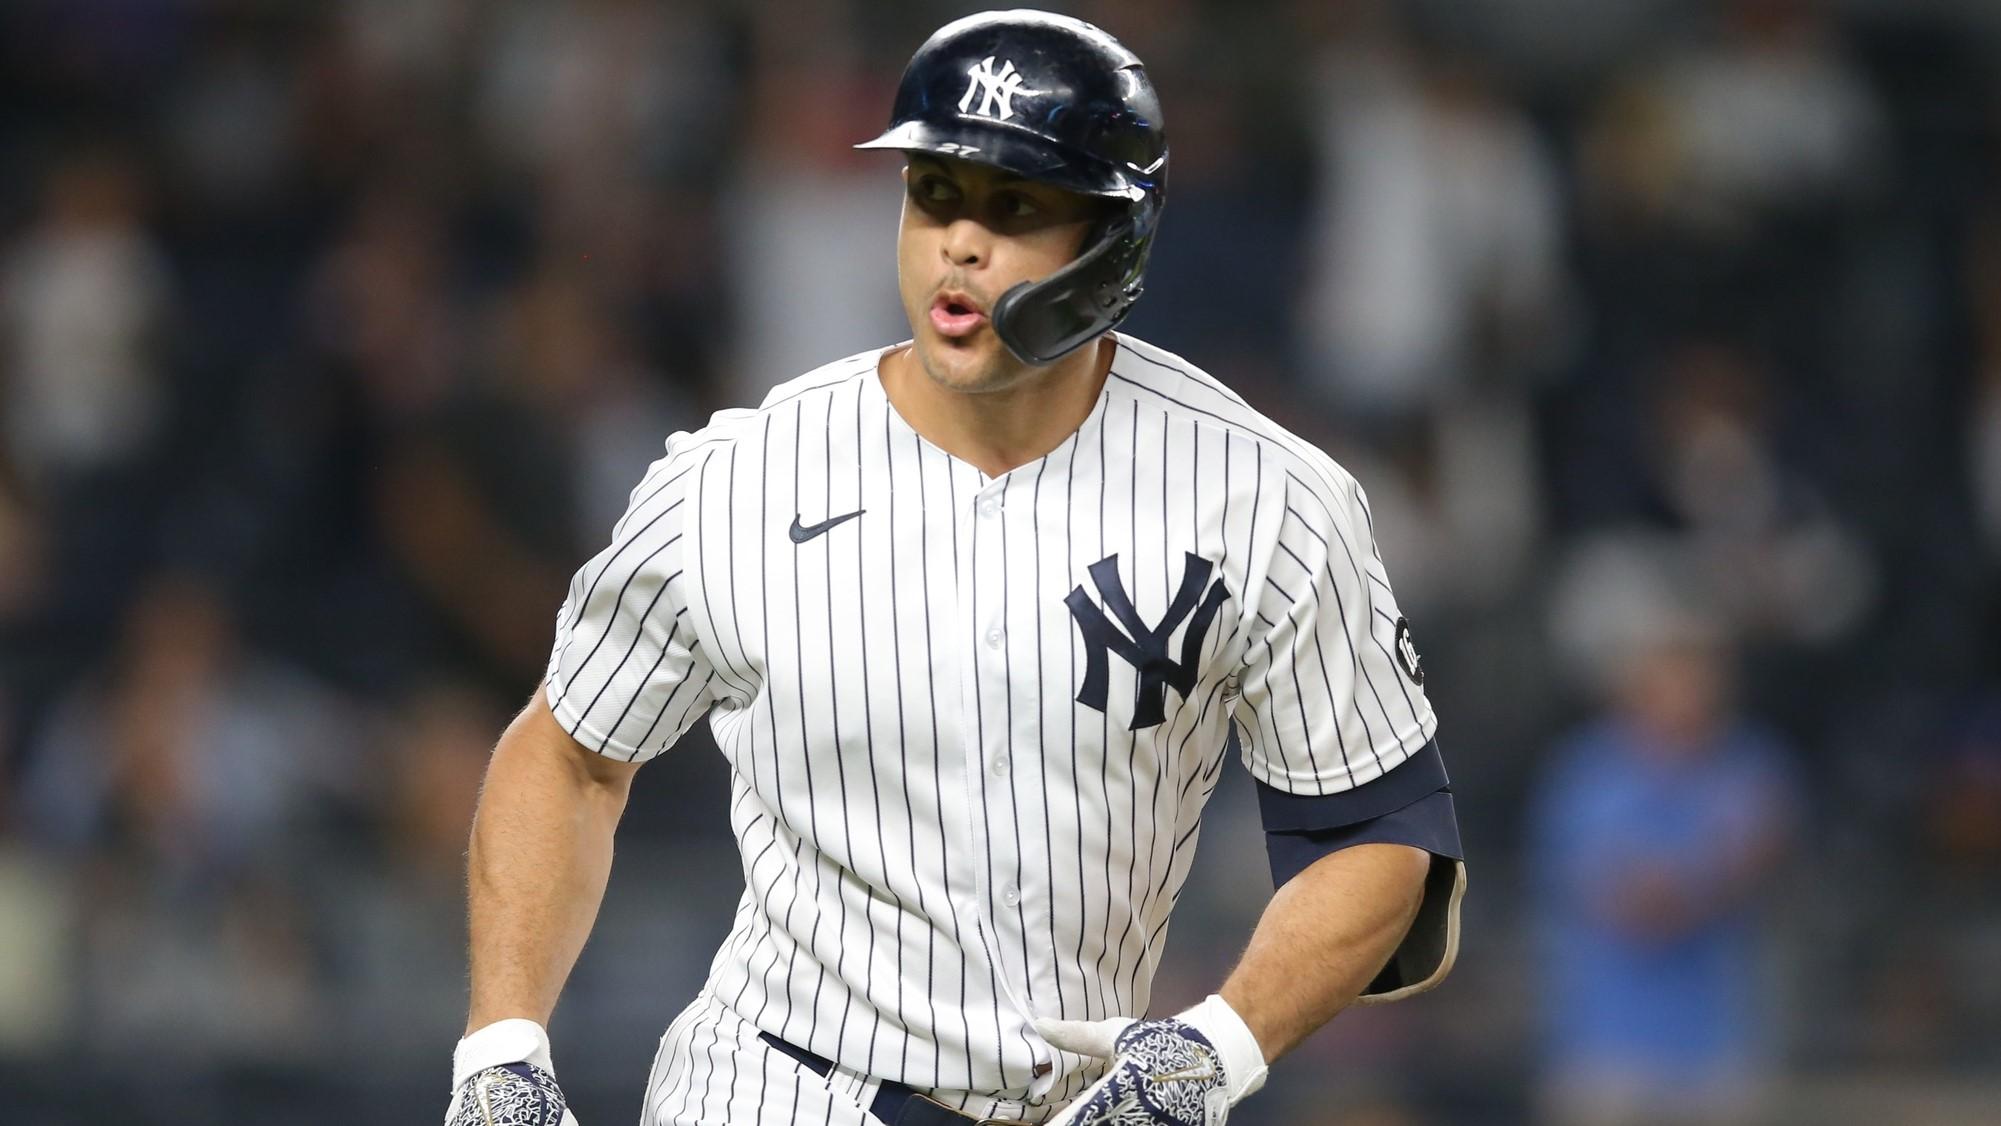 Sep 21, 2021; Bronx, New York, USA; New York Yankees right fielder Giancarlo Stanton (27) reacts as he rounds the bases after hitting a solo home run against the Texas Rangers during the third inning at Yankee Stadium. / Brad Penner-USA TODAY Sports